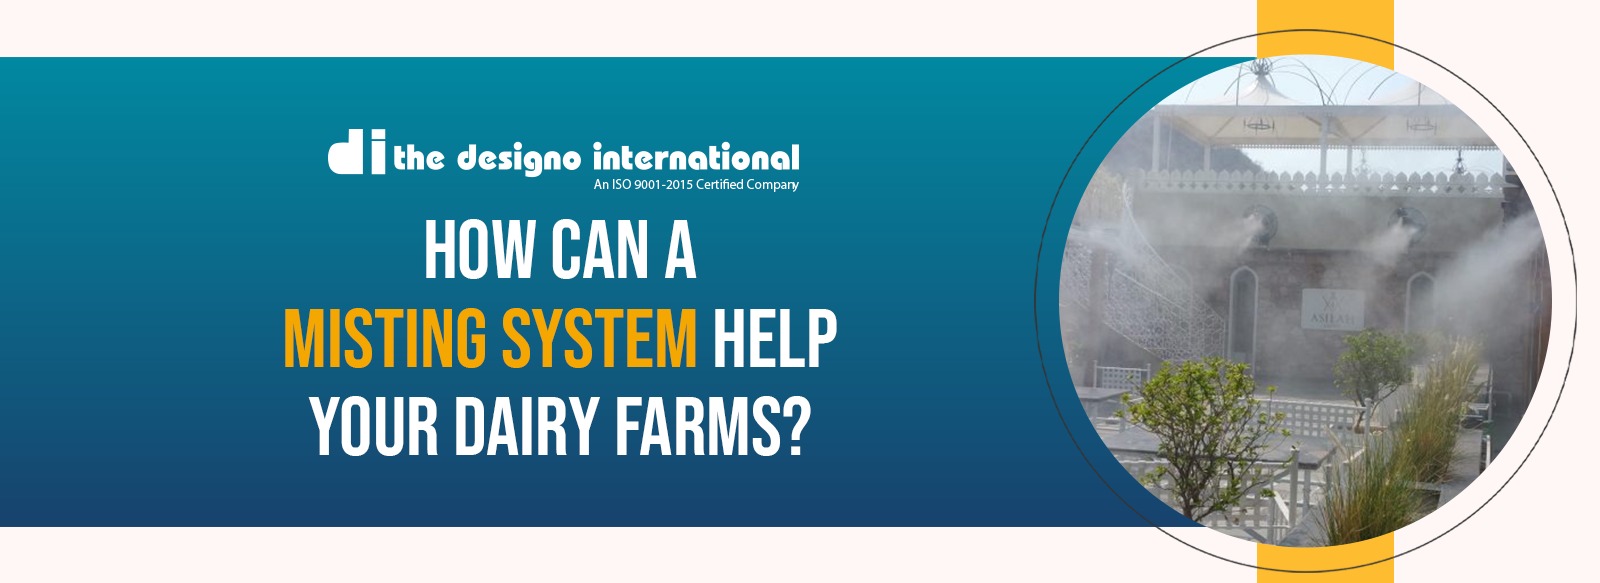 How Can a Misting System Help Your Dairy Farm?